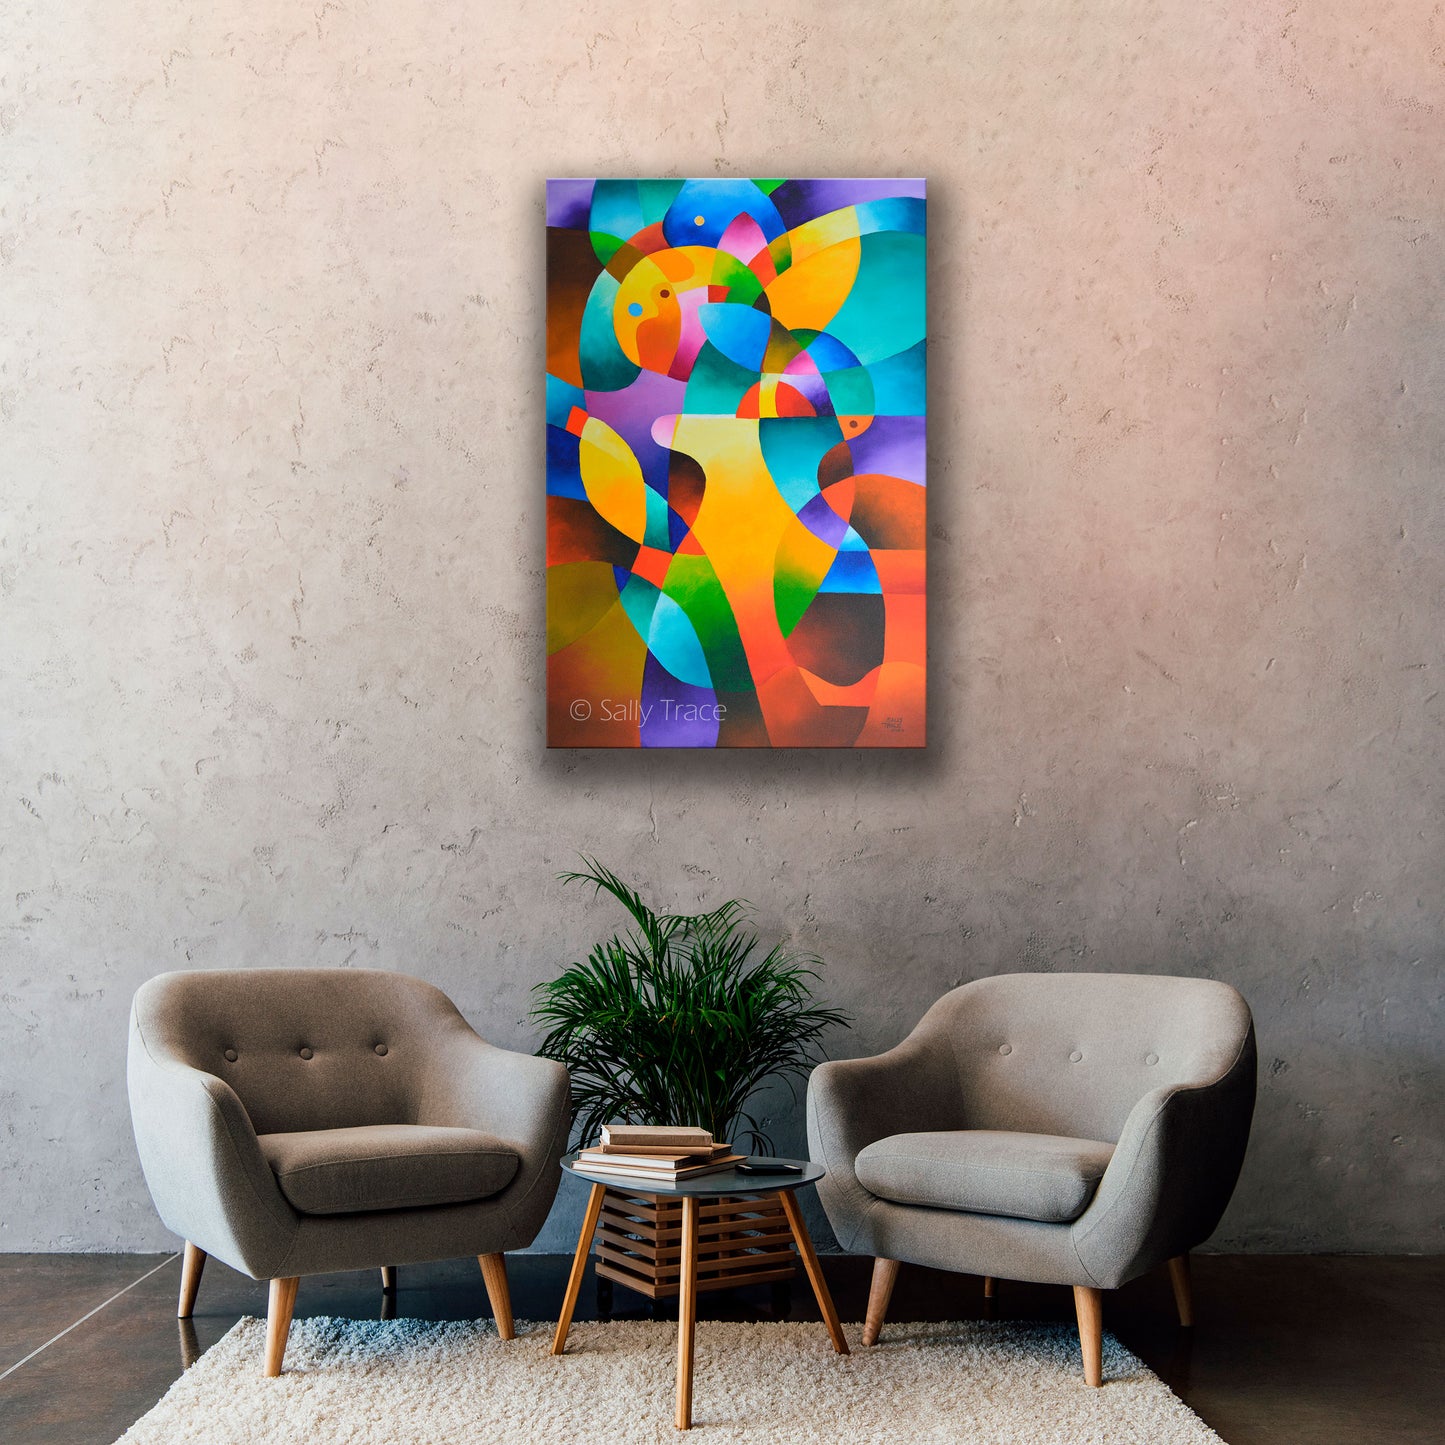 Geometric cubism, Abstract art paintings, modern art geometric hard edged original abstract painting "Interior Journey" by Sally Trace, free shipping